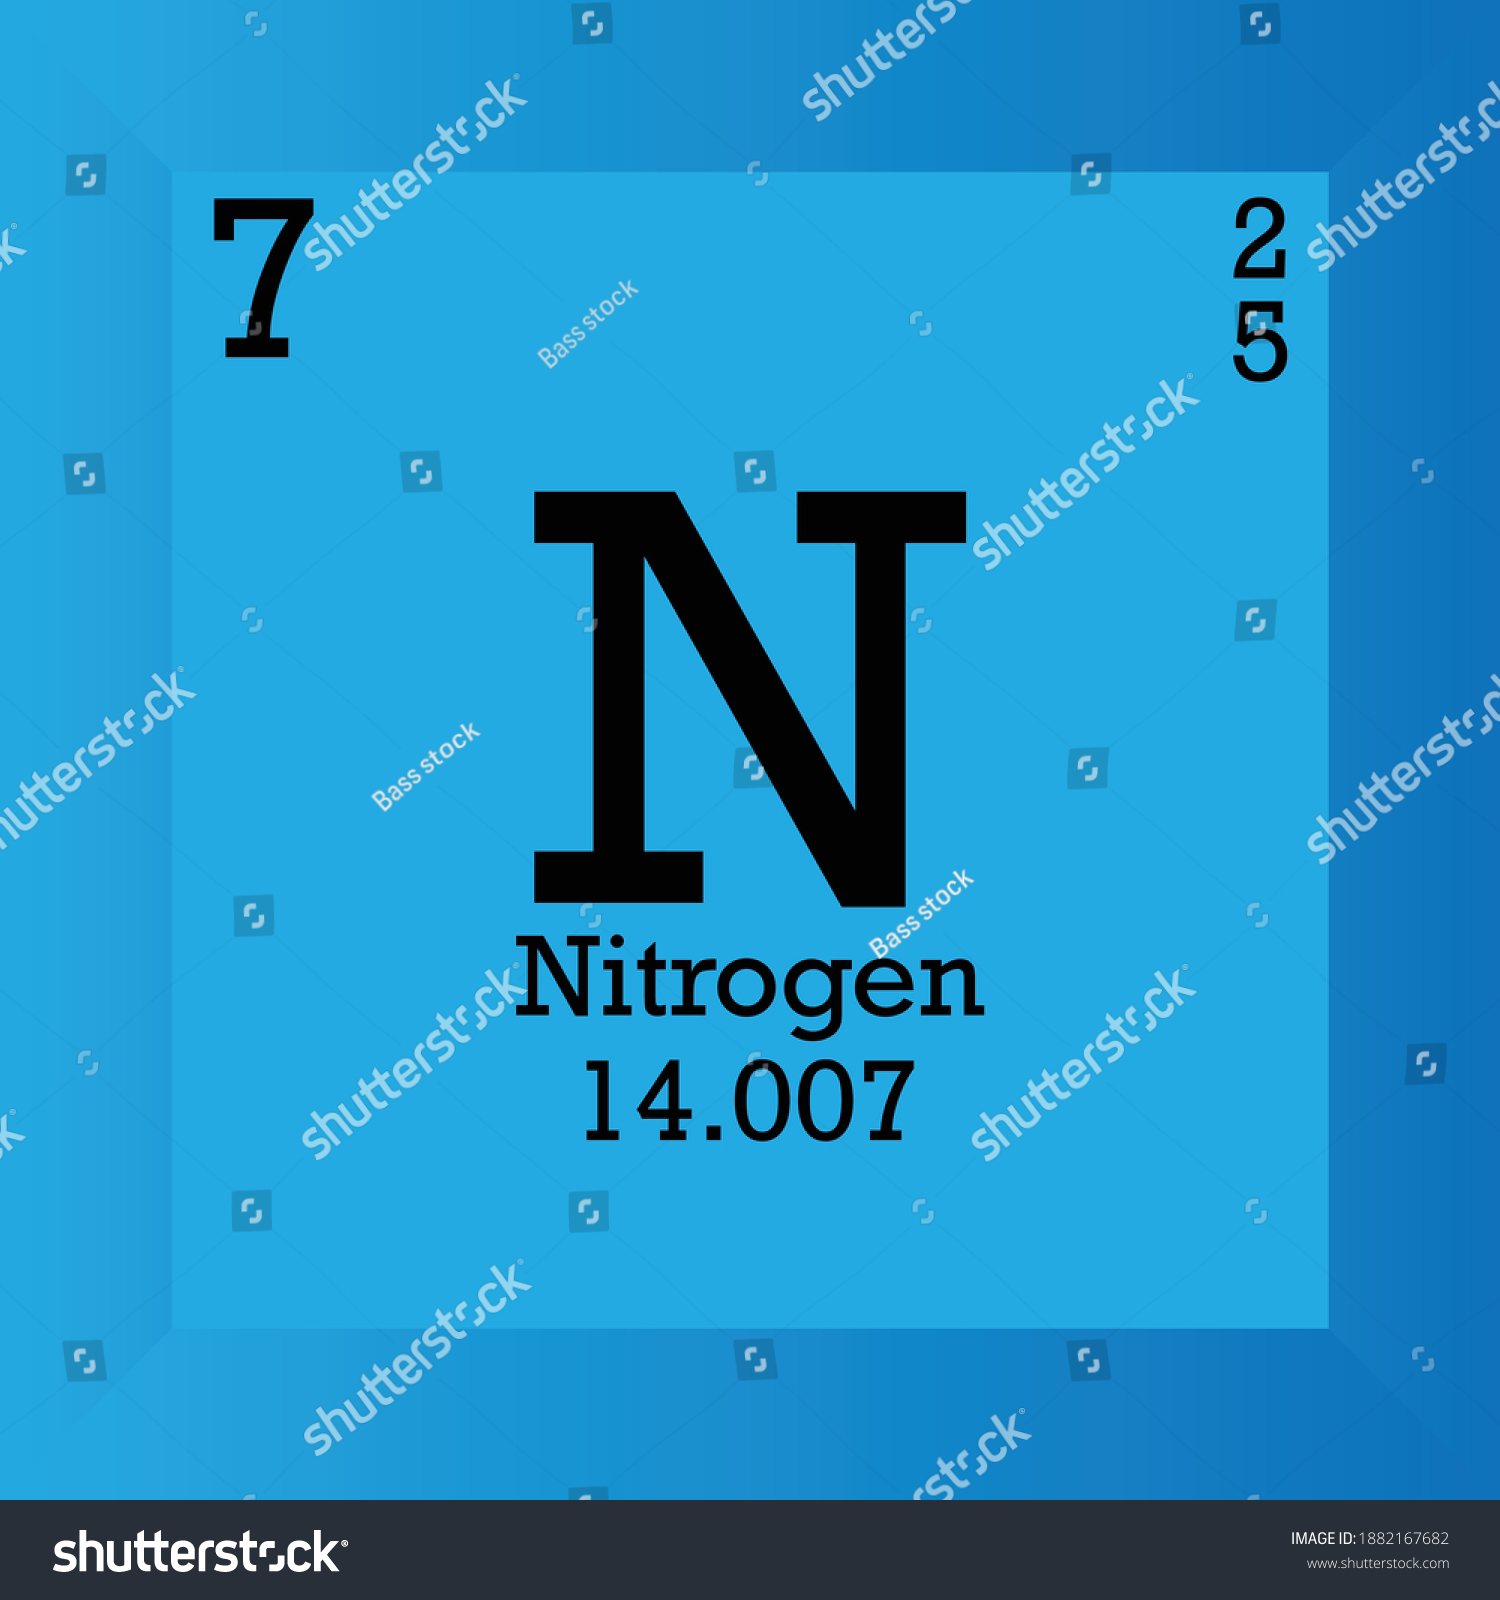 N Nitrogen Chemical Element Periodic Table Stock Vector Royalty ...